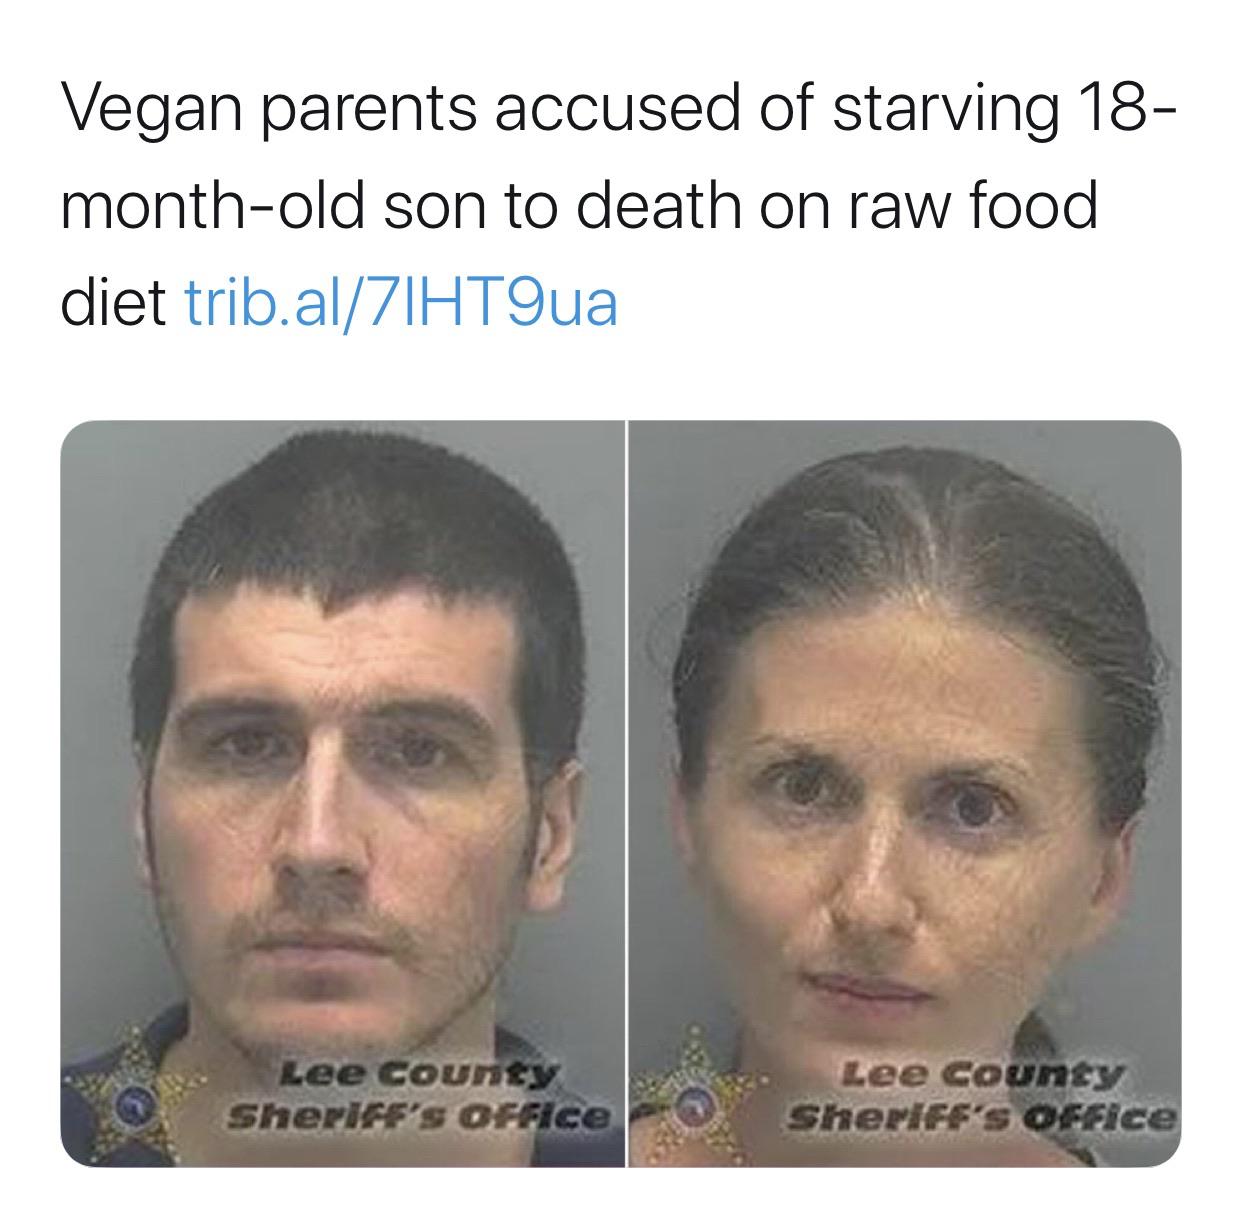 jaw - Vegan parents accused of starving 18 monthold son to death on raw food diet trib.alZIHT9ua Lee County Sheriff's Office Lee County Sheriff's Office